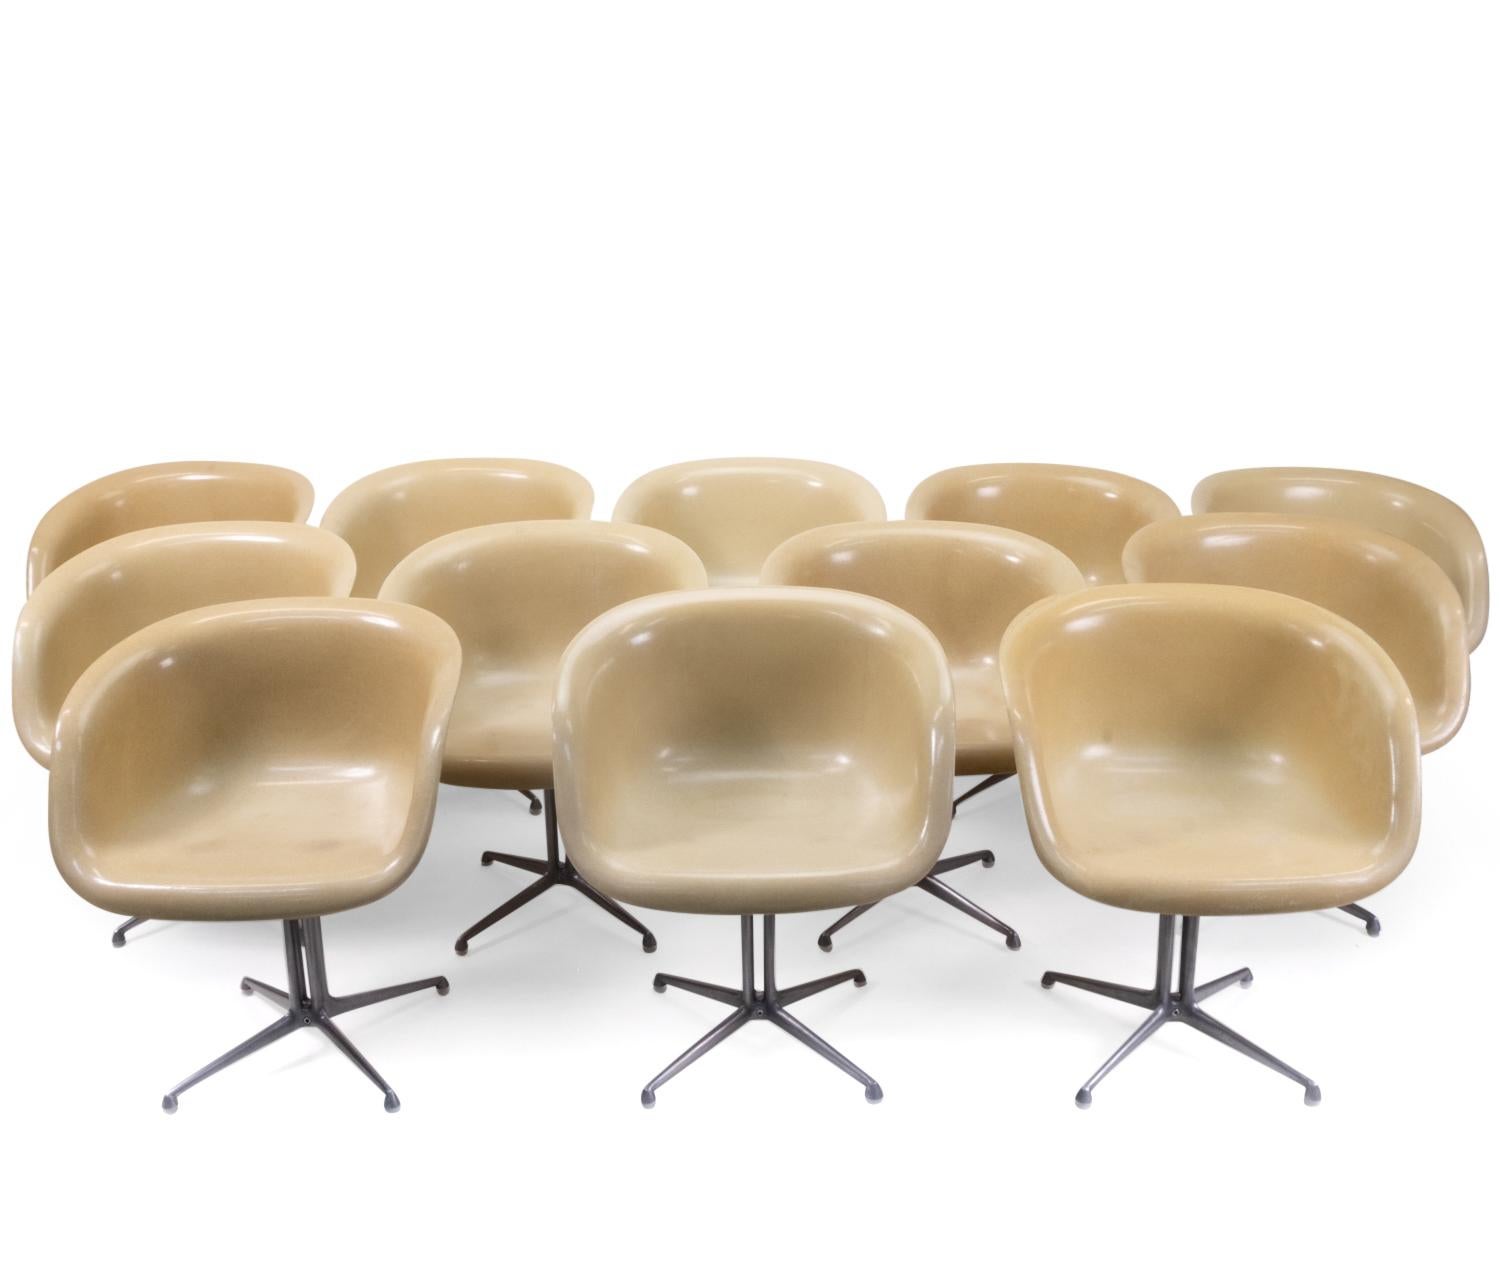 Eames low back armchairs with aluminum base. Designed by Charles & Ray Eames in co-operation with Alexander Girard.

The la Fonda chair was originally designed by the Eames’ couple for the “La Fonda Del Sol” restaurant in the Time Life Building